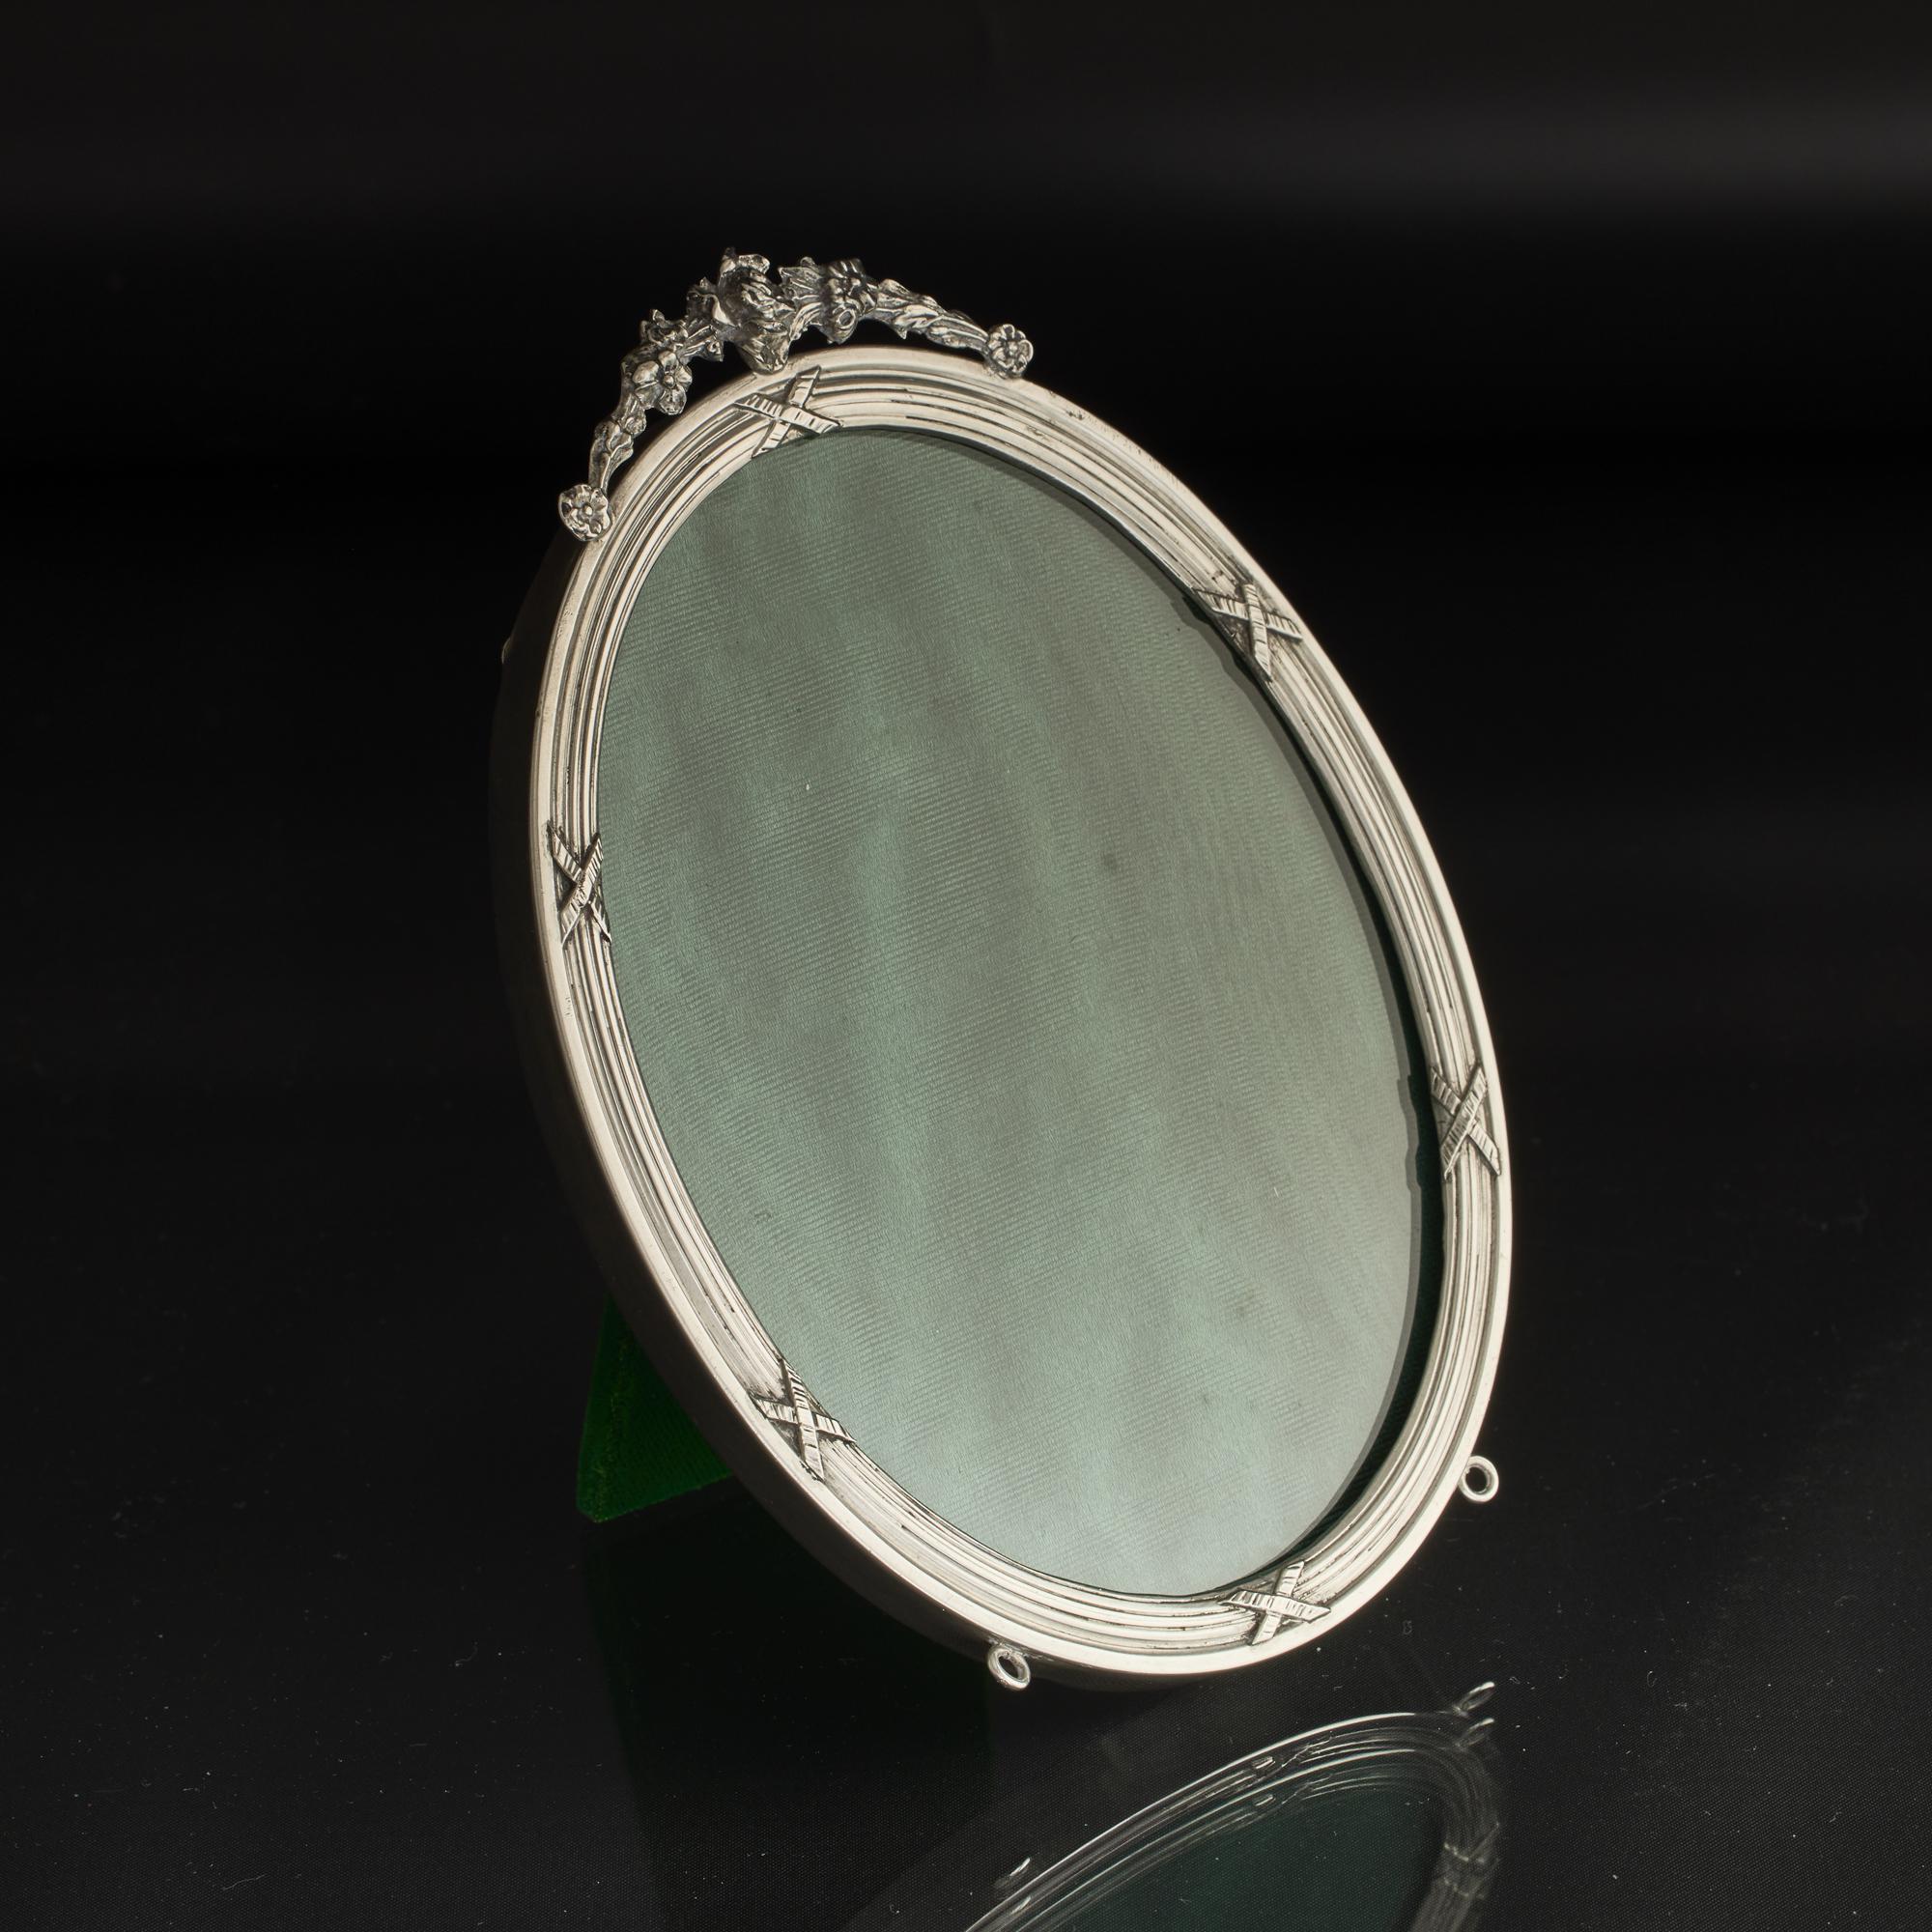 Good quality handmade antique oval silver photo frame with velvet back and easel, in the Edwardian style of the early 20th century. The silver frame has a cast decorative finial featuring a rose and other flowers while the body has a reed and ribbon